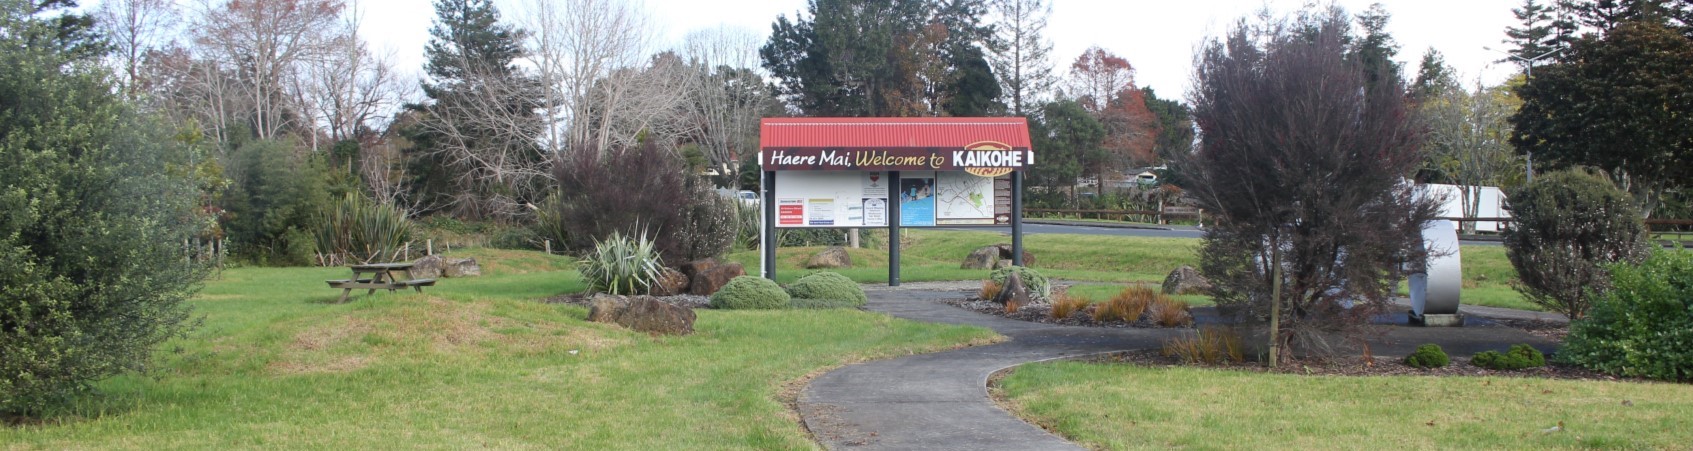 Where to Stay in Kaikohe - Accommodation